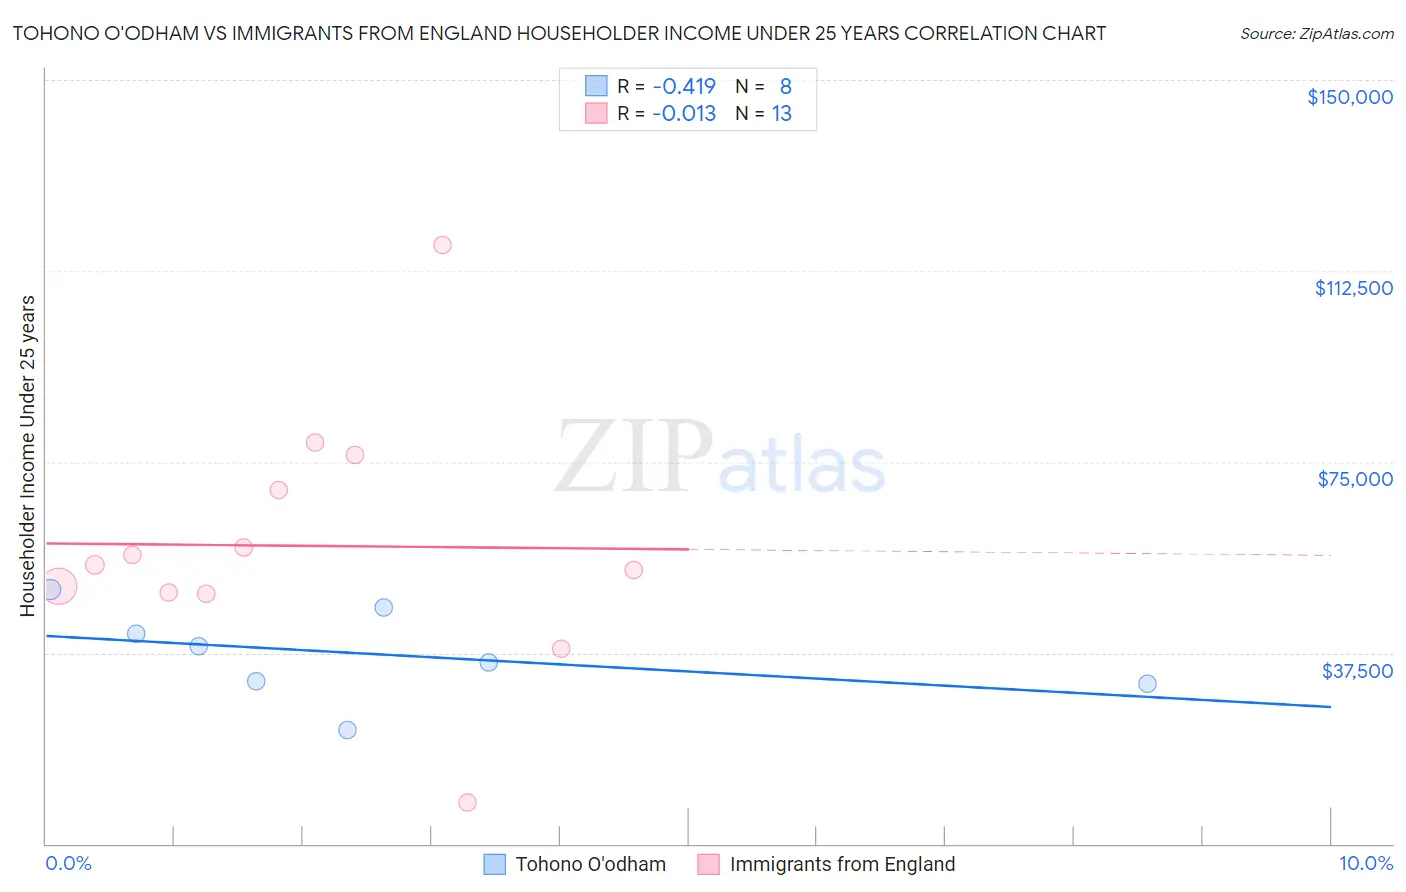 Tohono O'odham vs Immigrants from England Householder Income Under 25 years